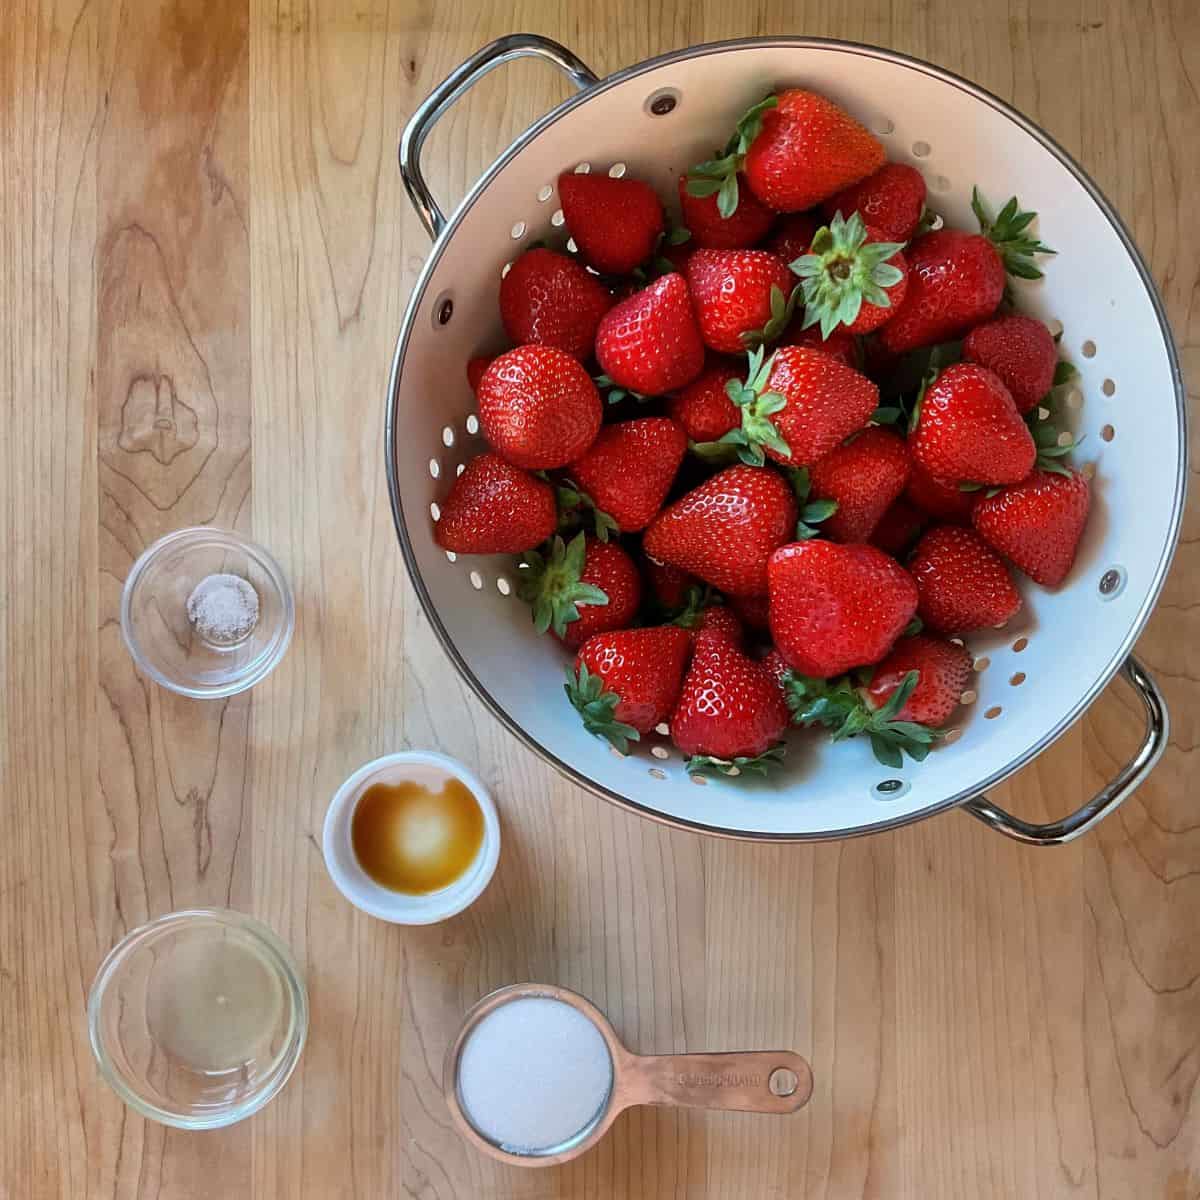 Ingredients for roasting strawberries on a wooden table.